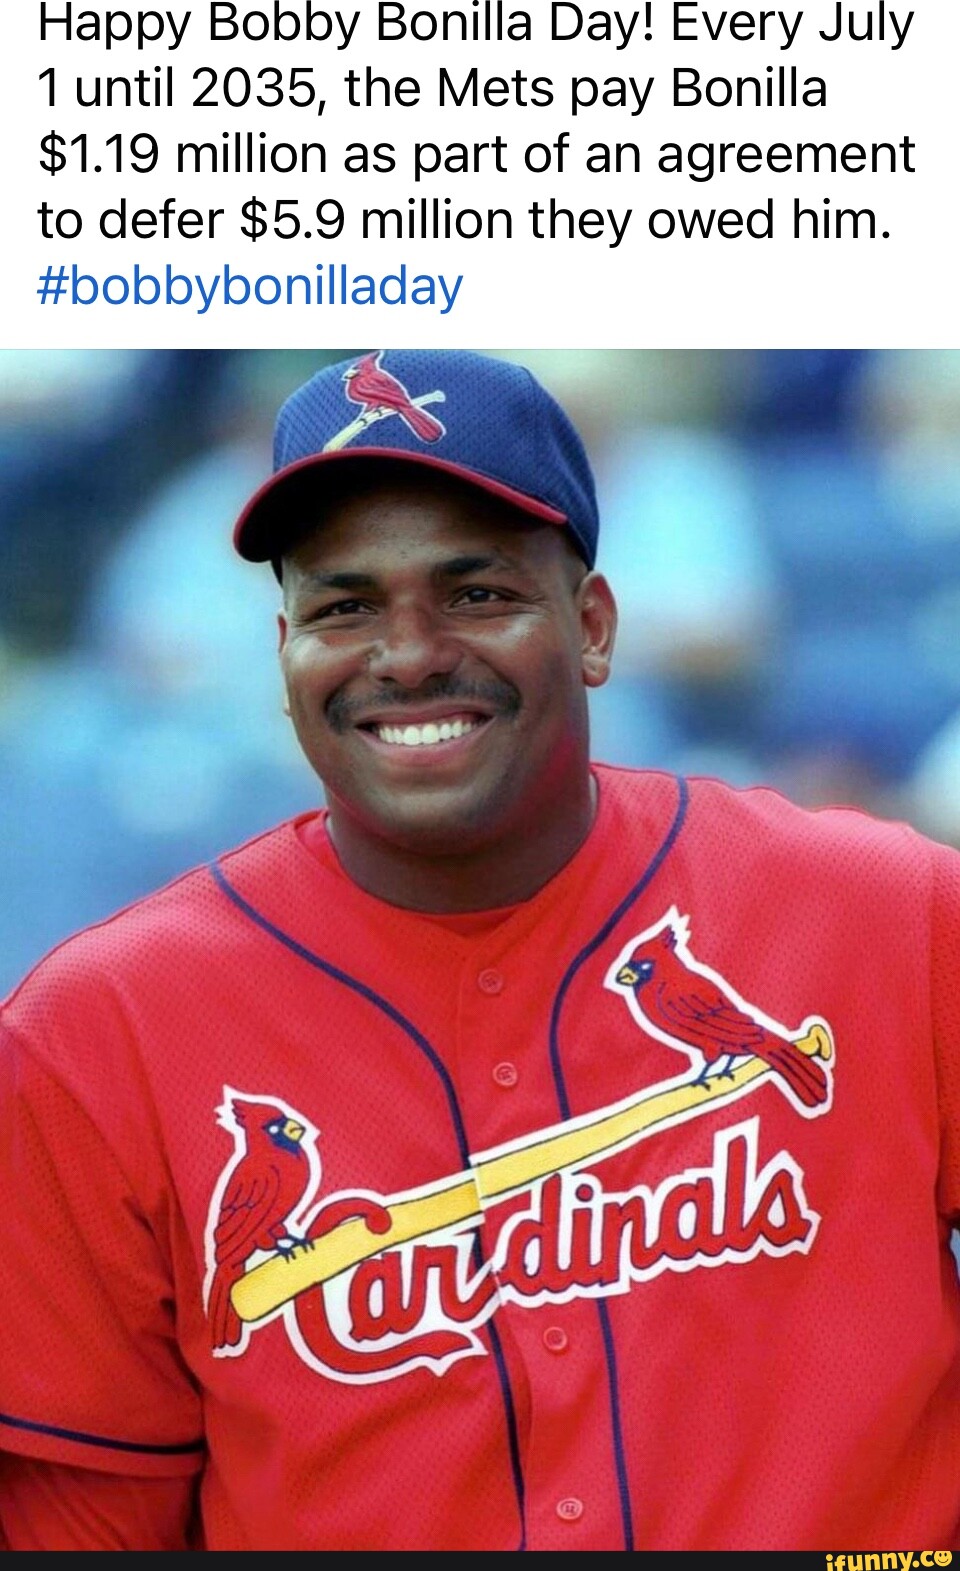 Happy Bobby Bonilla Day! Every July 1 until 2035, the Mets pay Bonilla  $1.19 million as part of an agreement to defer $5.9 million they owed him.  #bobbybonilladay - iFunny Brazil